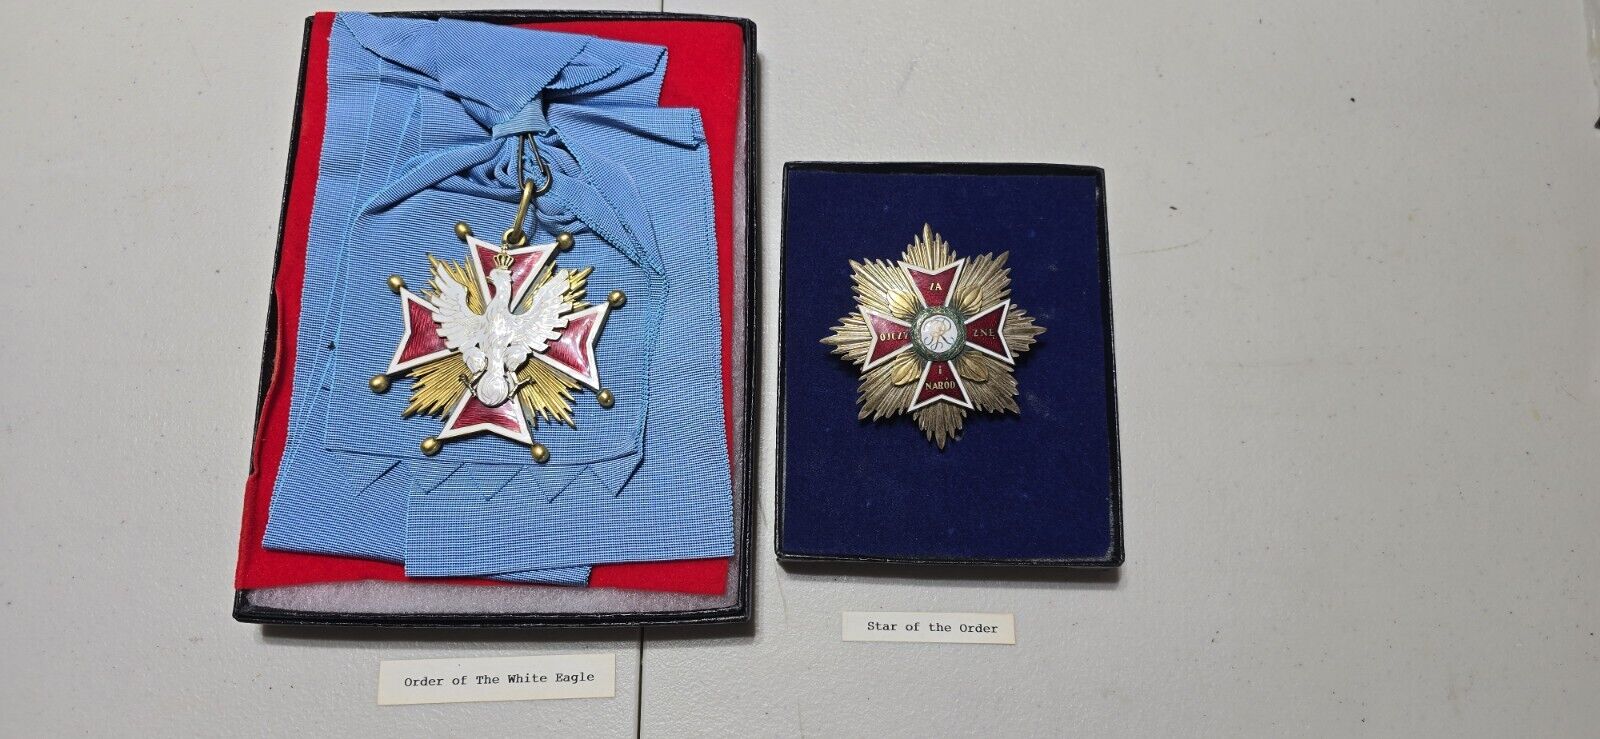 Original Polish Poland Order of White Eagle and Star of the Order